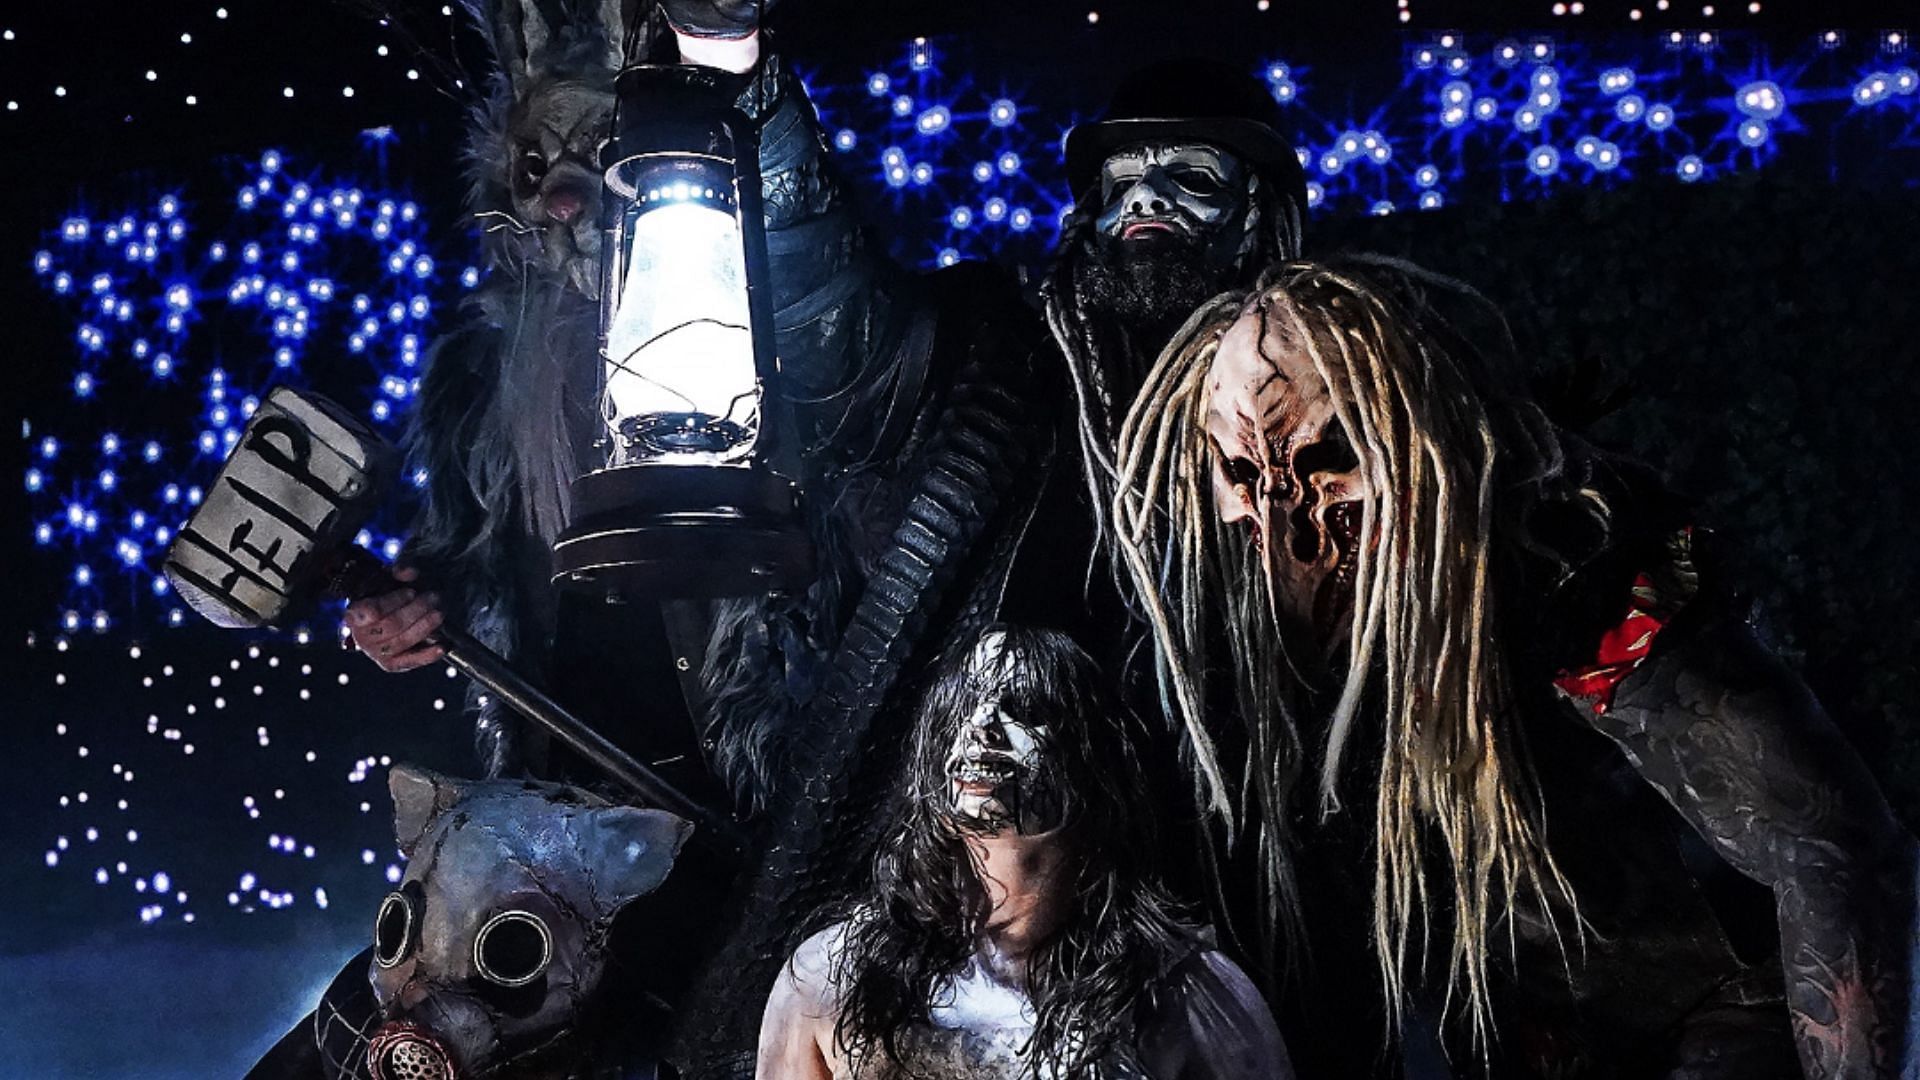 The Wyatt Sick6 made their debut on WWE RAW this weel [Image Credits: WWE